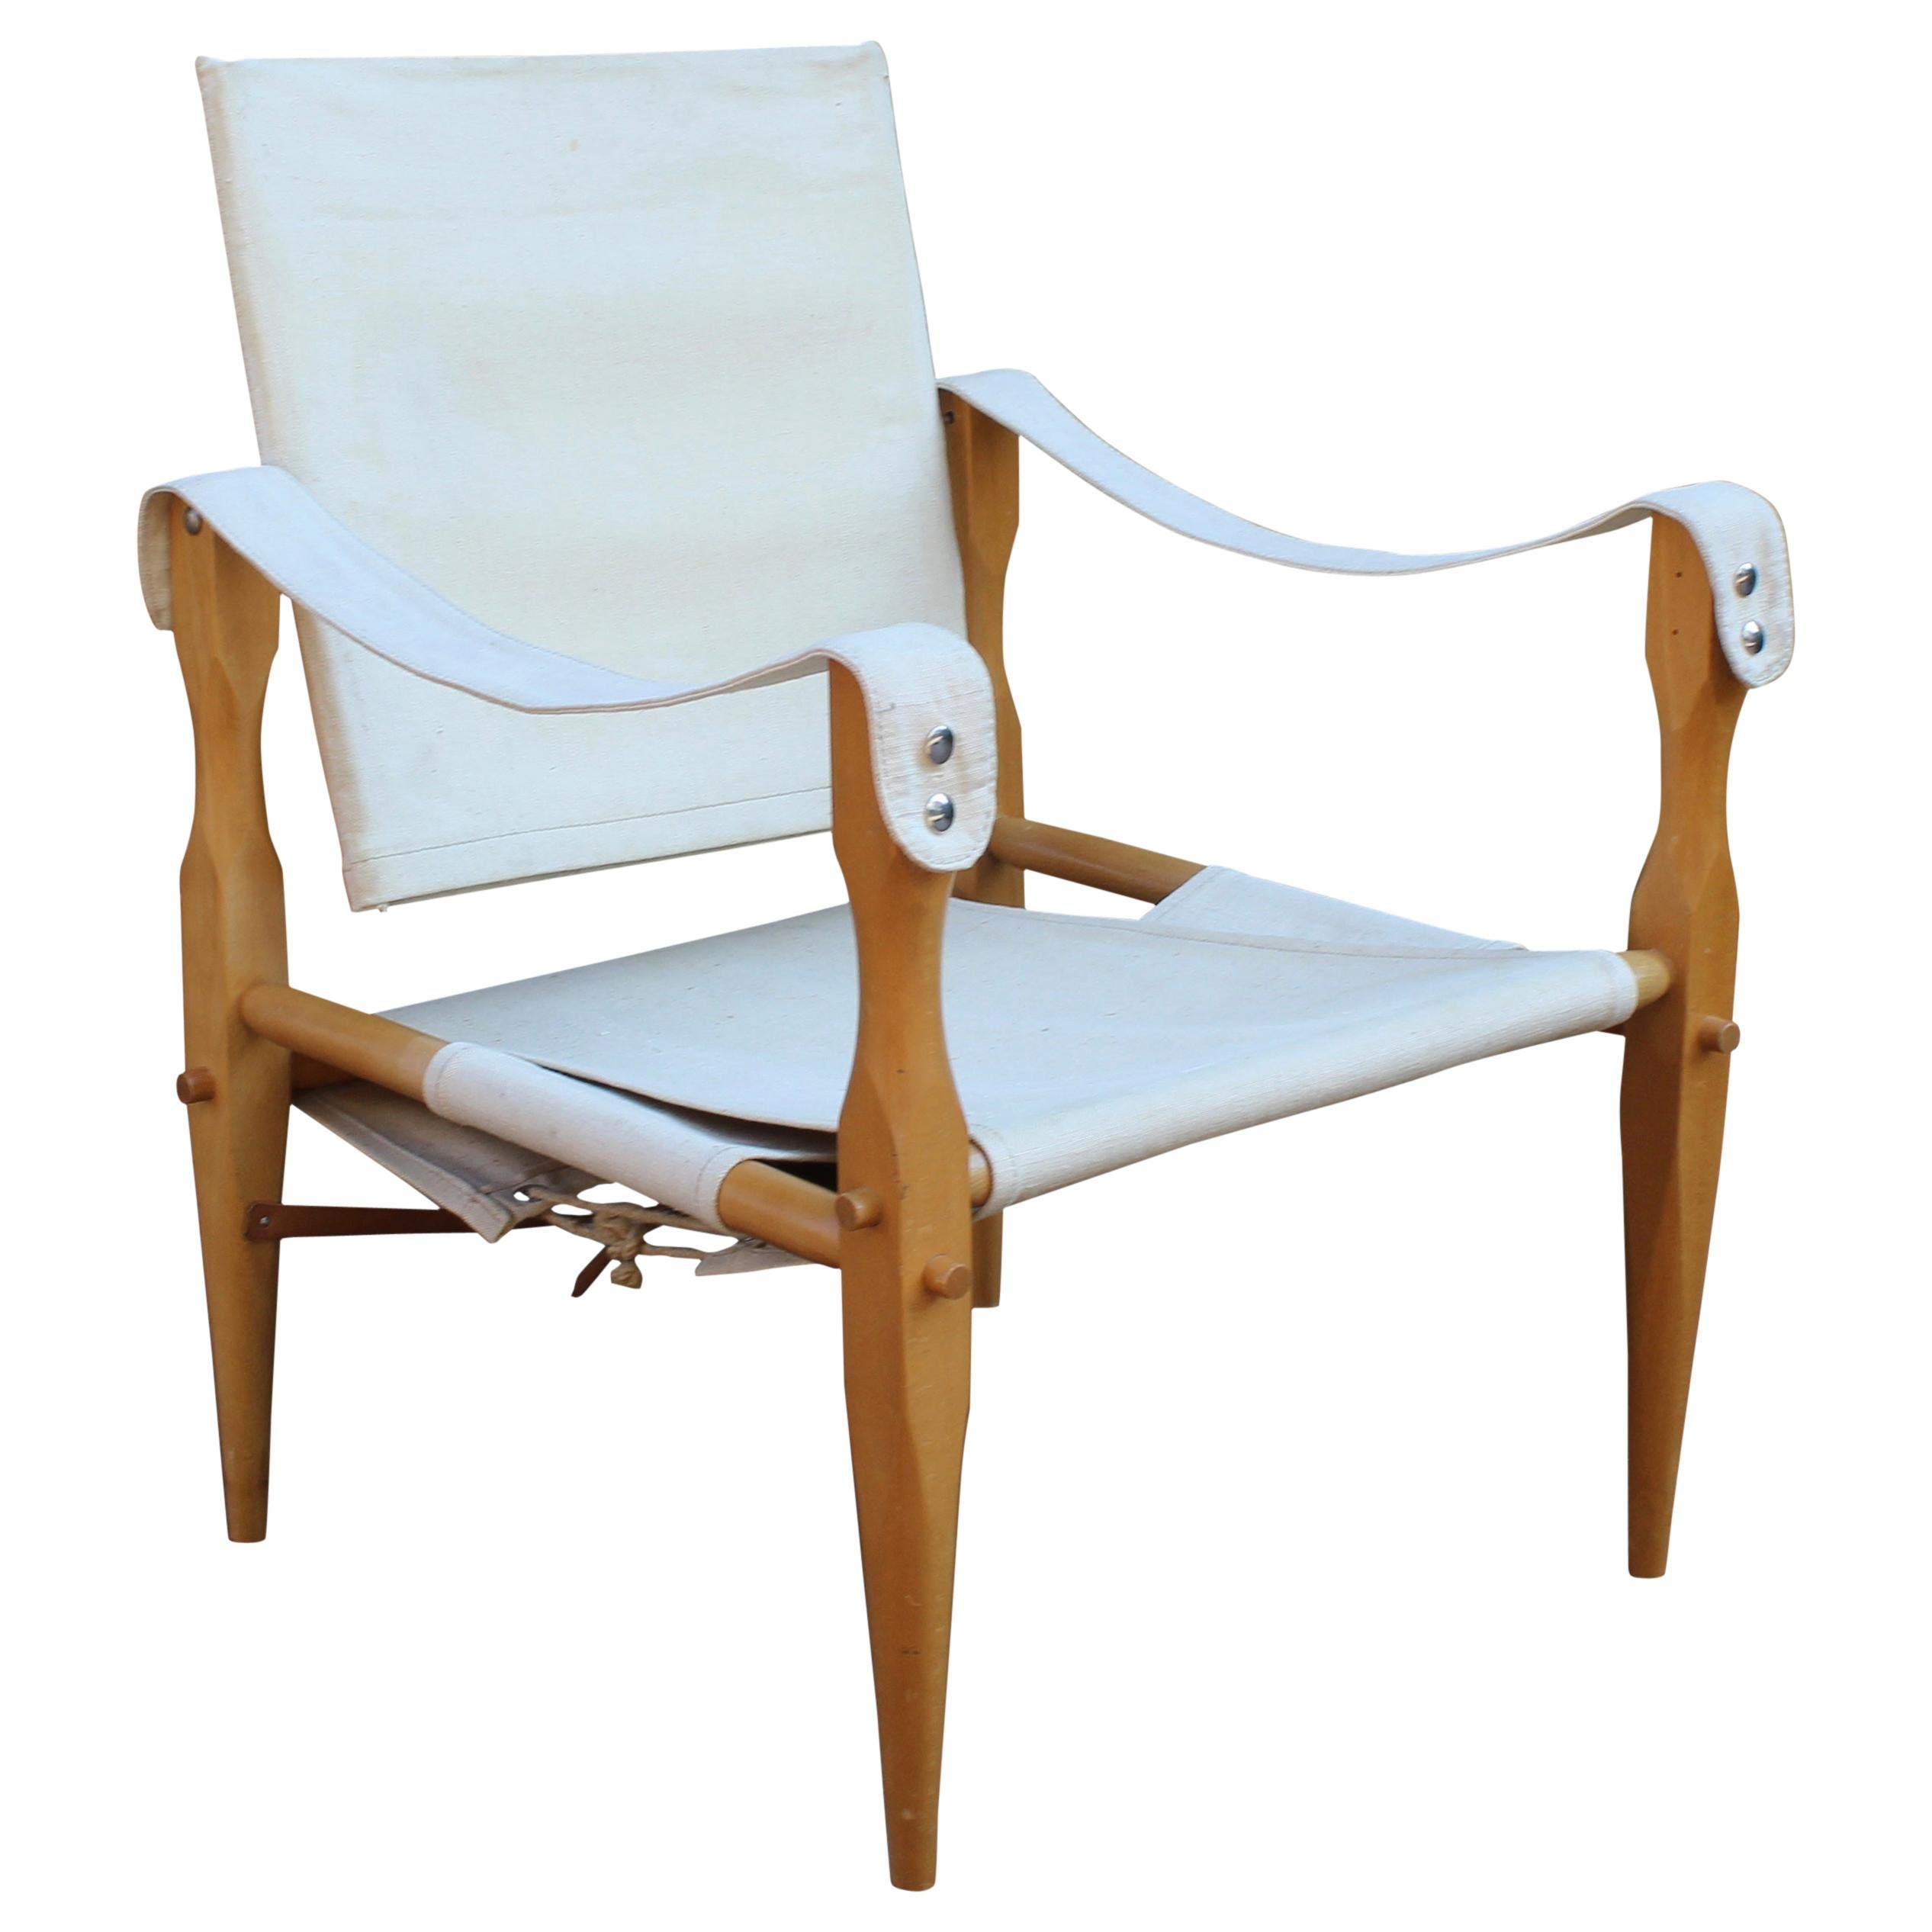 1960s 'Safari' Chair Wilhelm Kienzle Canvass Seat, Back and a Beech Frame